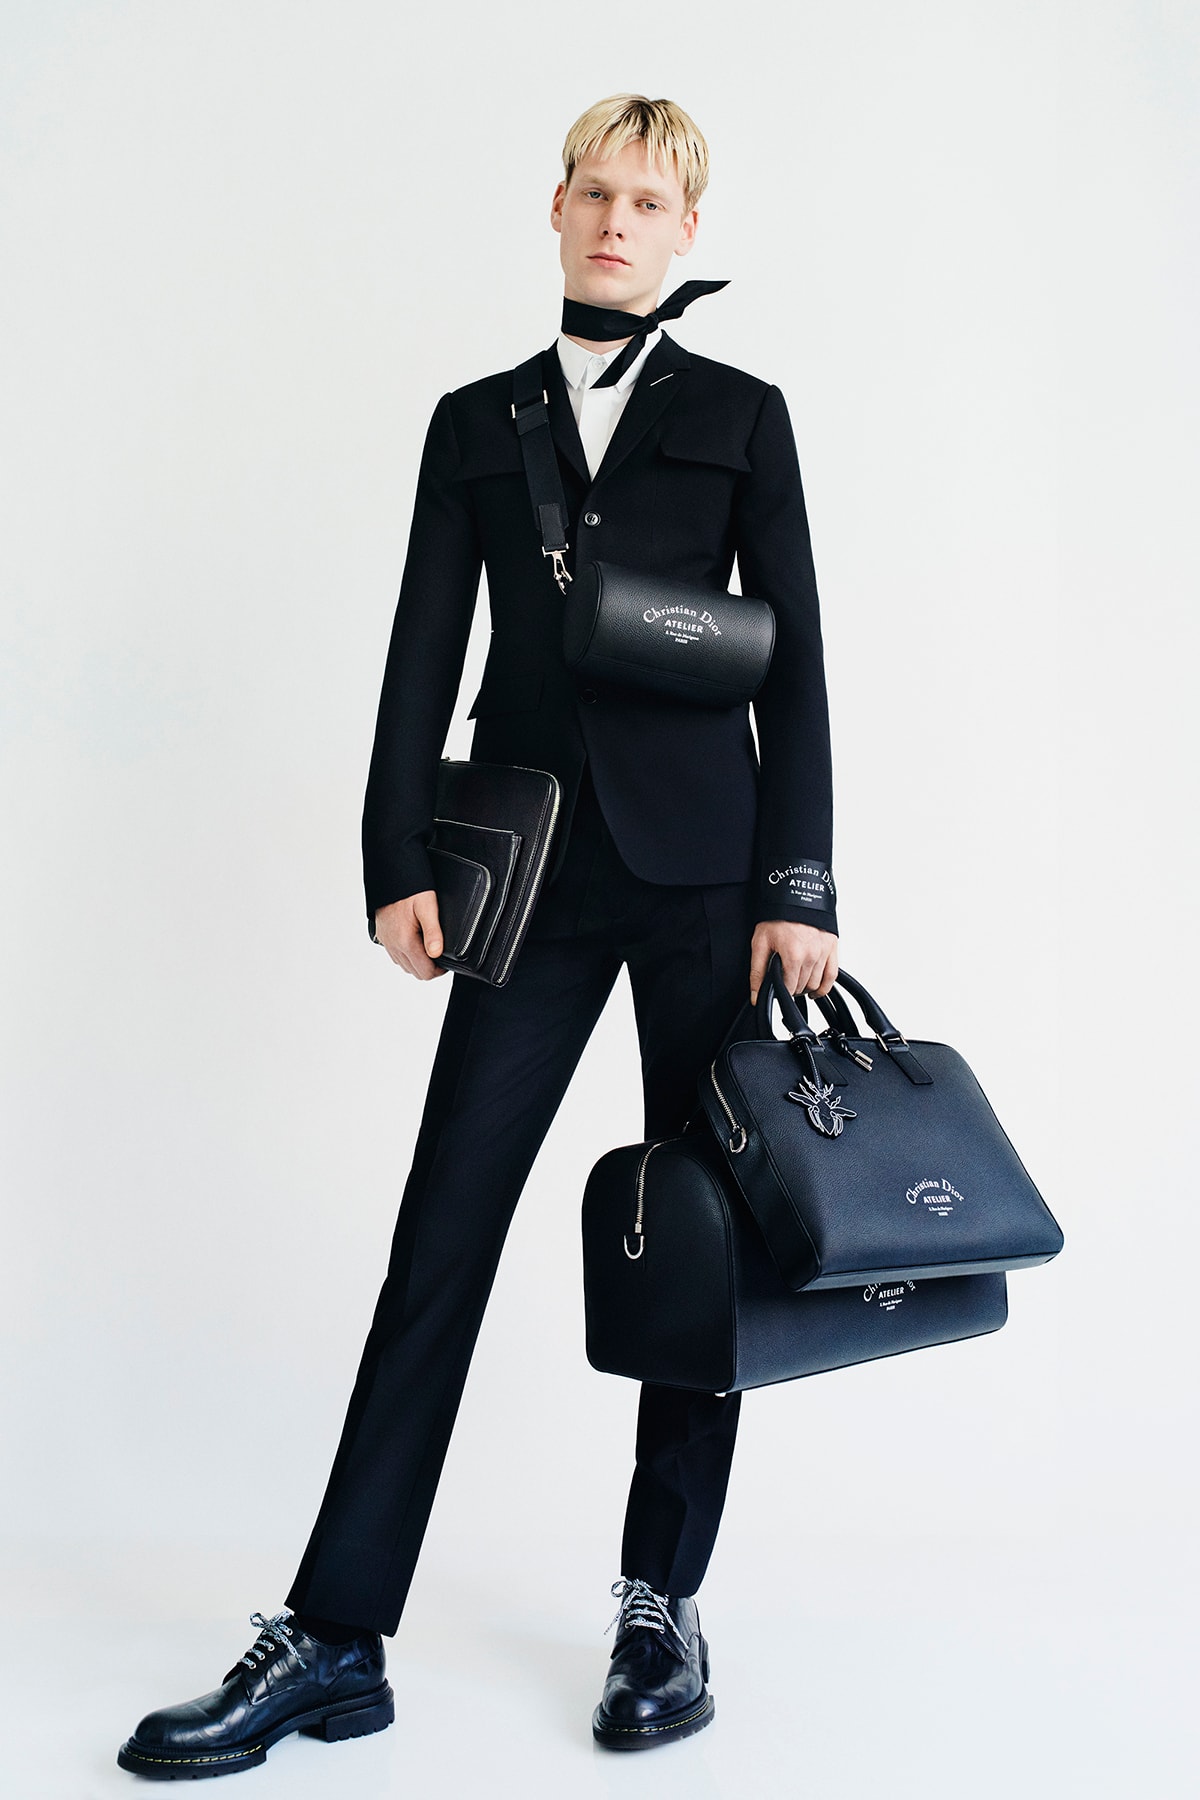 Dior Homme Atelier Fall 2018 Bags crossbody baggage duffle bags backpack briefcases accessories travel